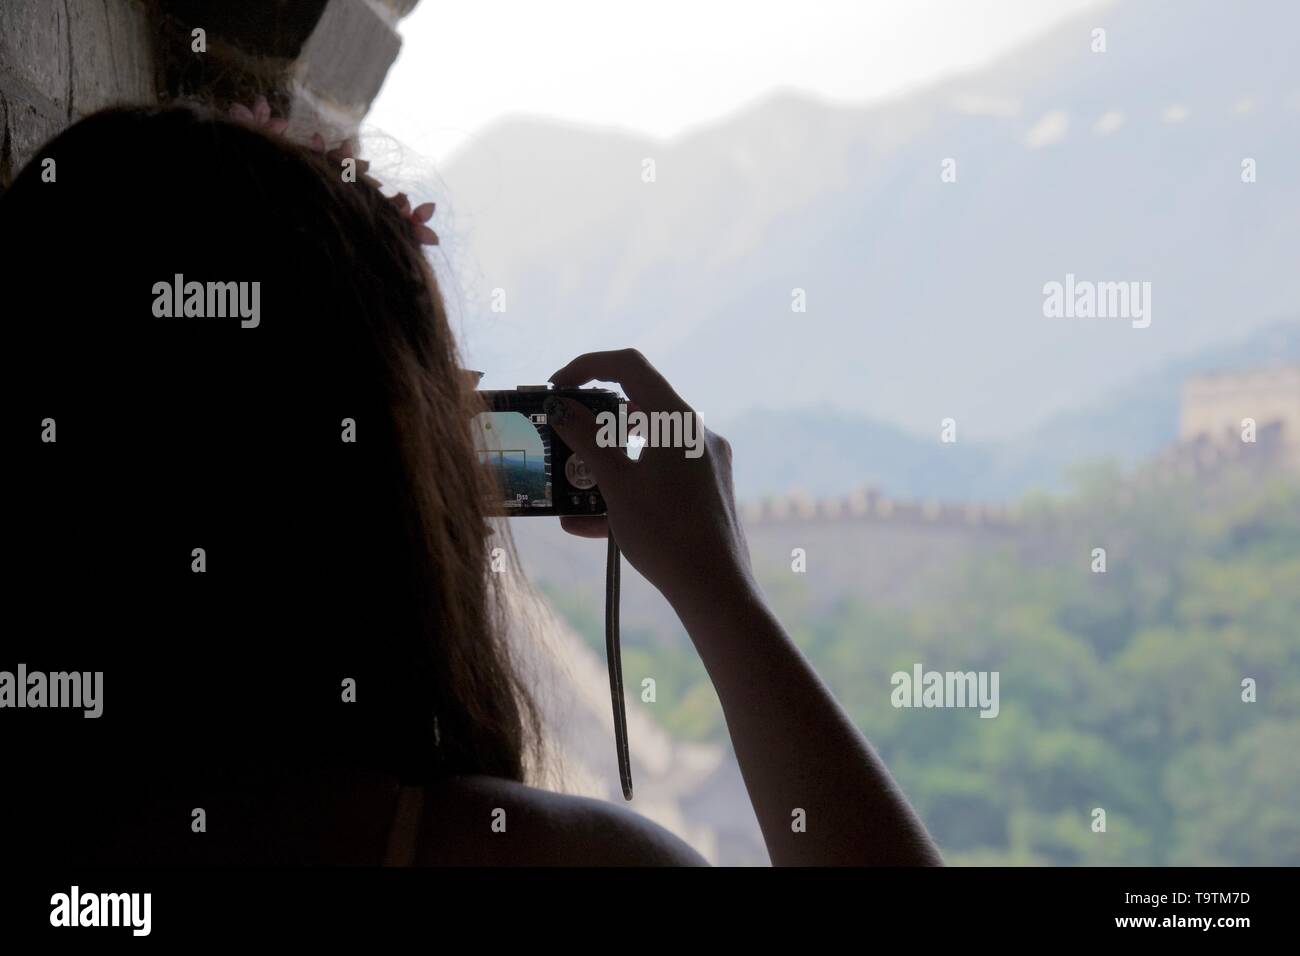 Silhouette of lady taking a photograph of the Great Wall of China, the wall visible through her camera. Stock Photo